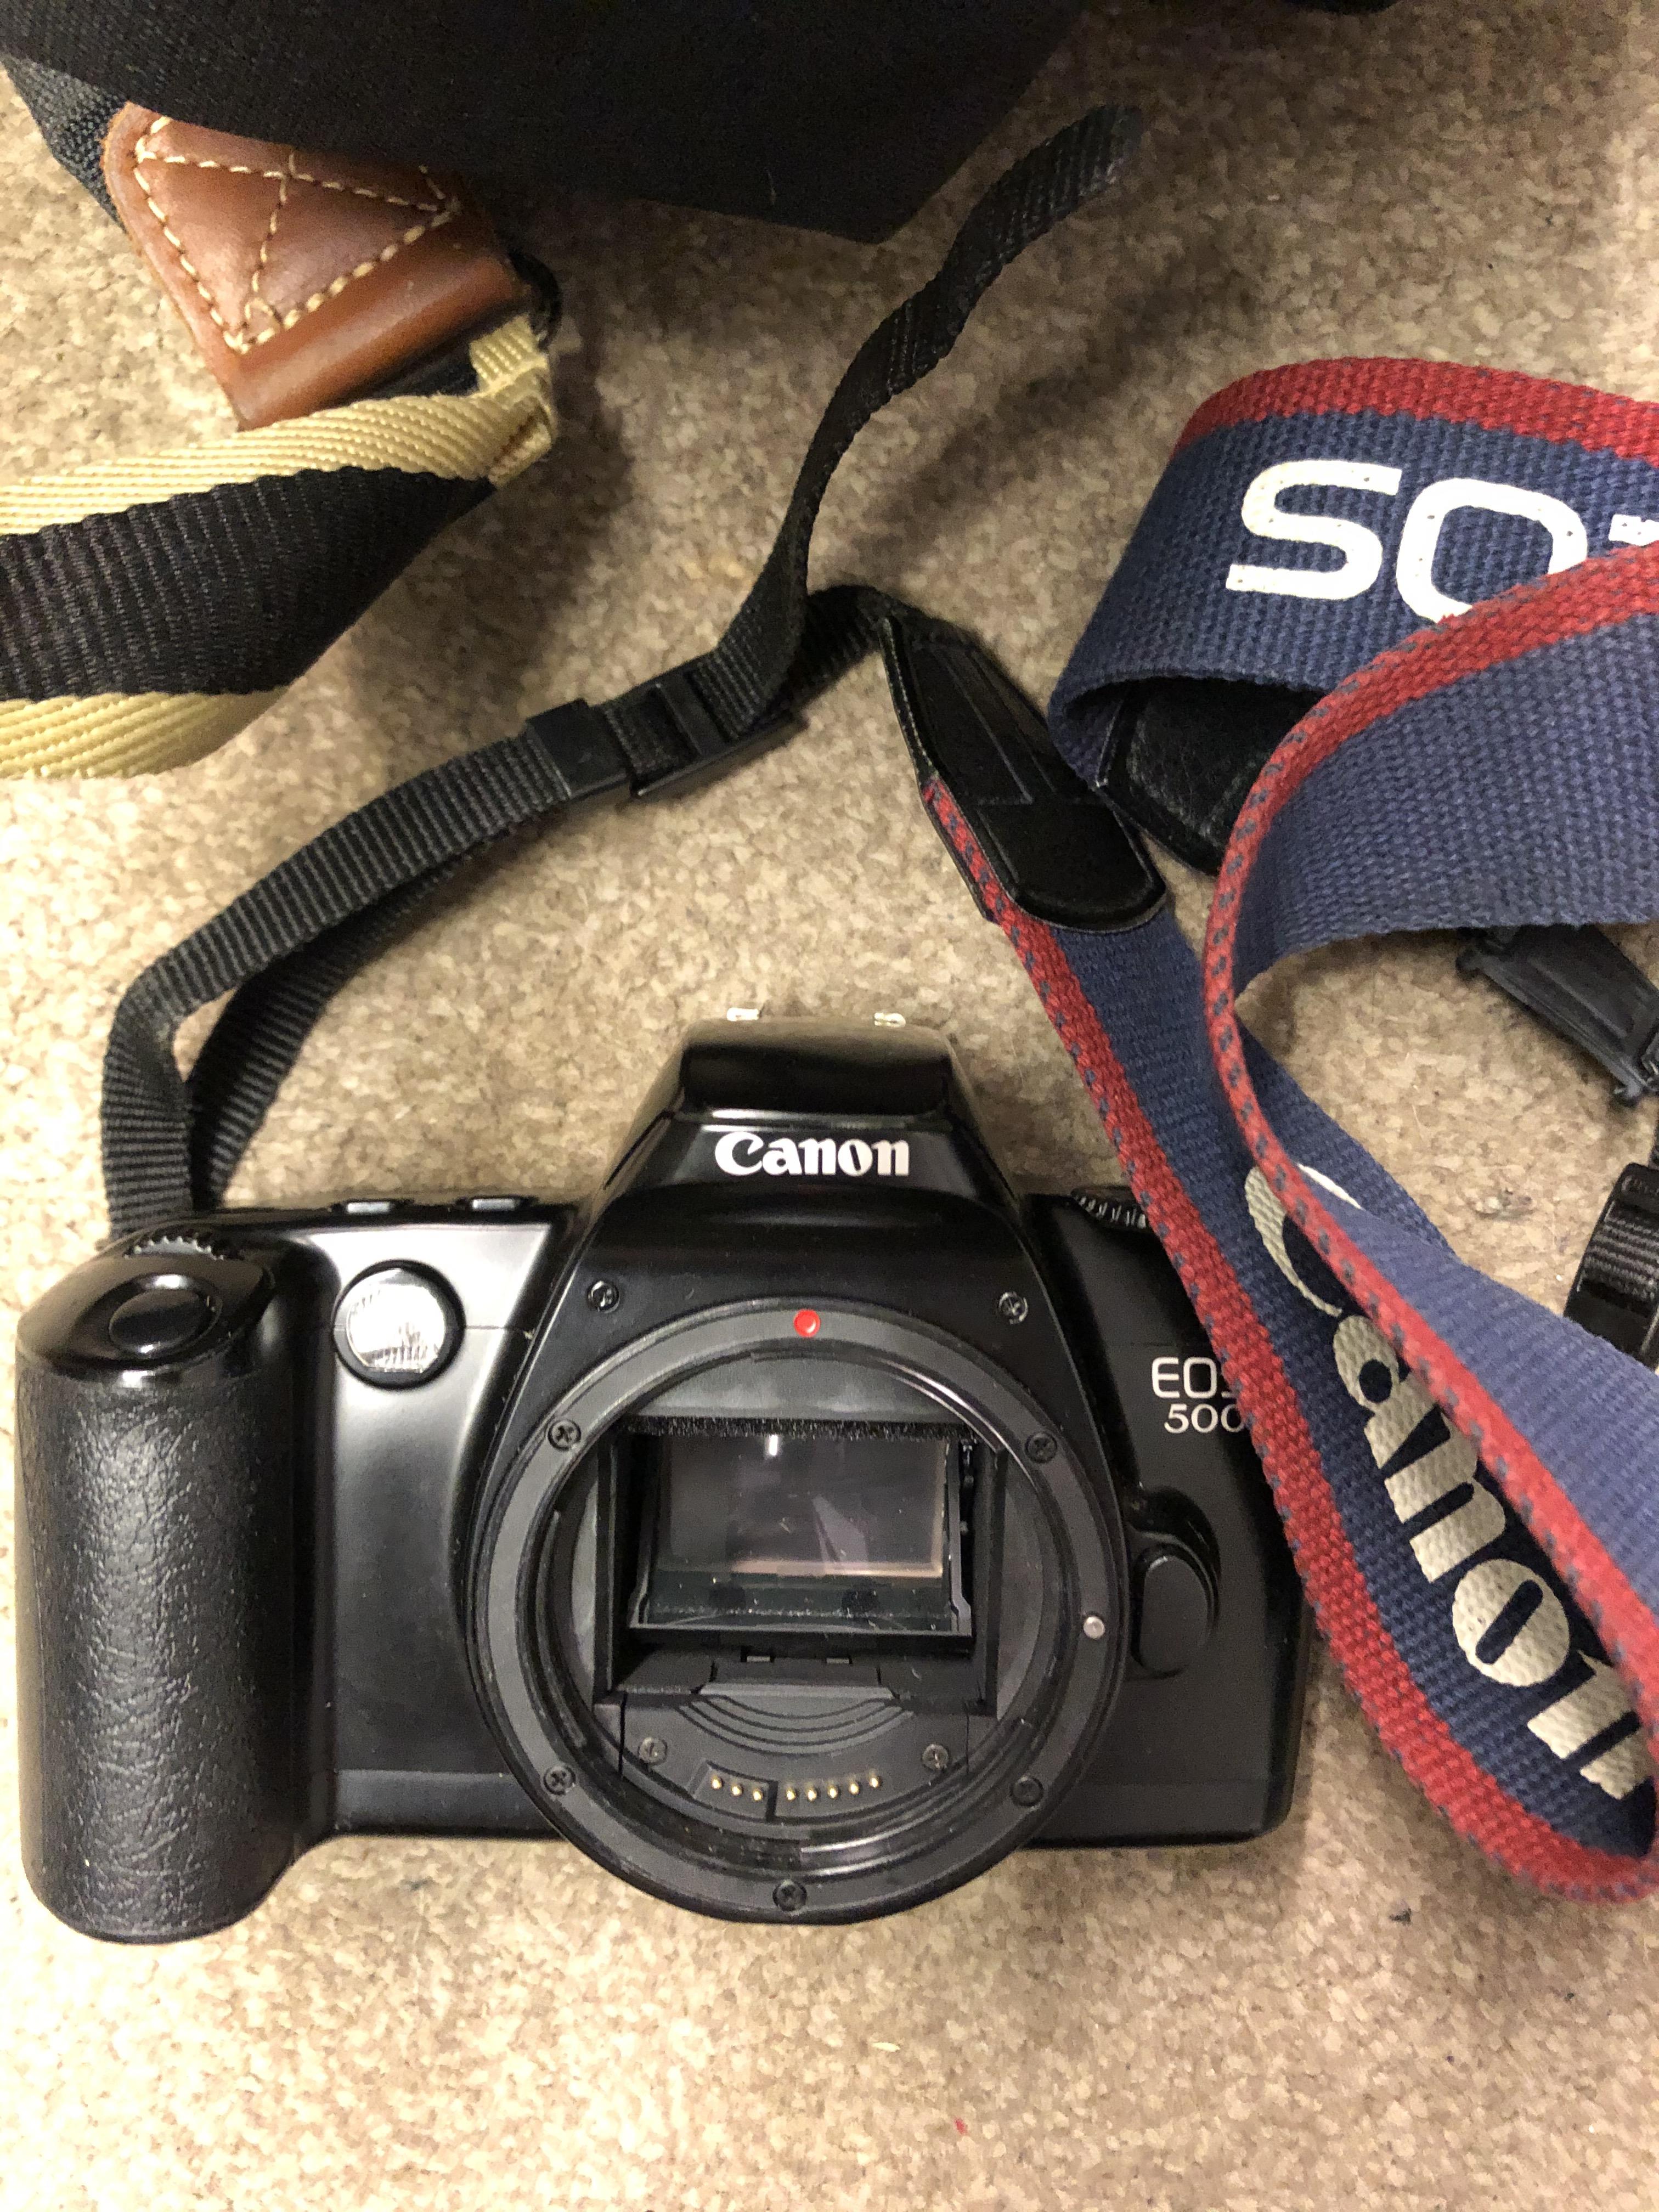 NYLON CARRY CASE WITH CANON EOS500 CAMERA, LENSES, FLASH, FILTERS AND TRIPOD. - Image 2 of 4